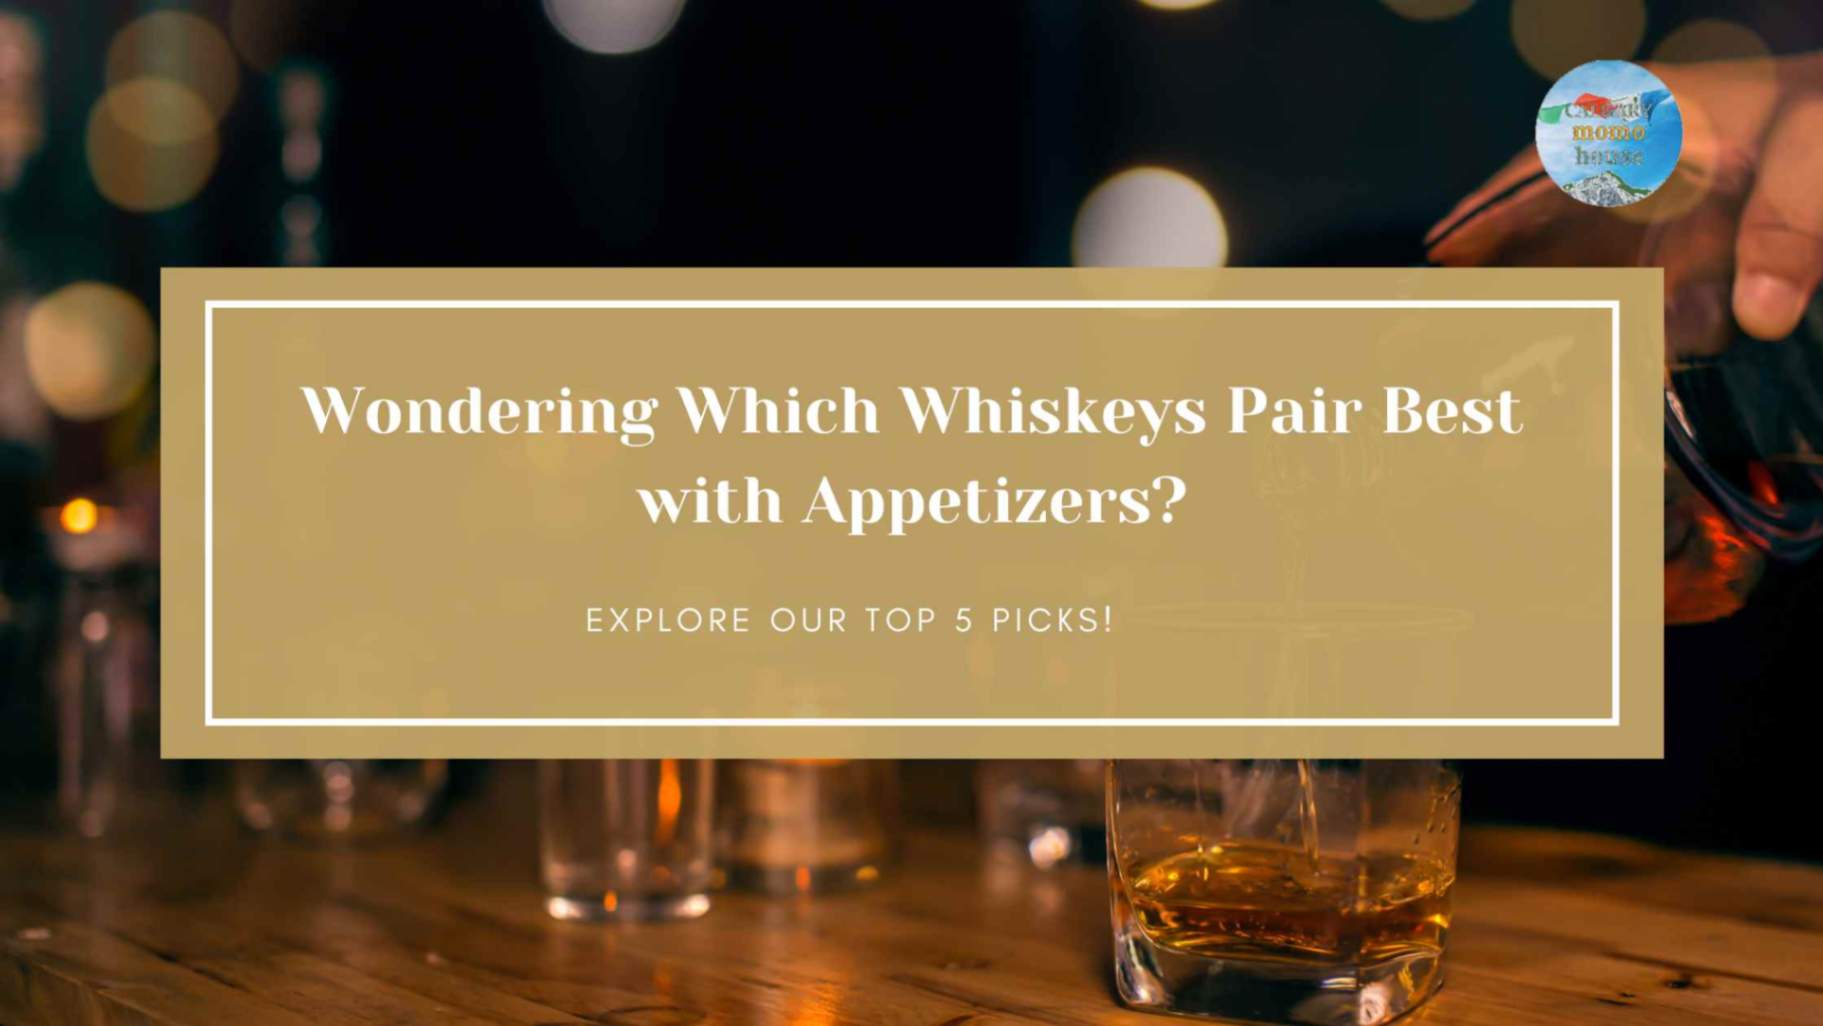 Wondering Which Whiskeys Pair Best with Appetizers? Explore Our Top 5 Picks!